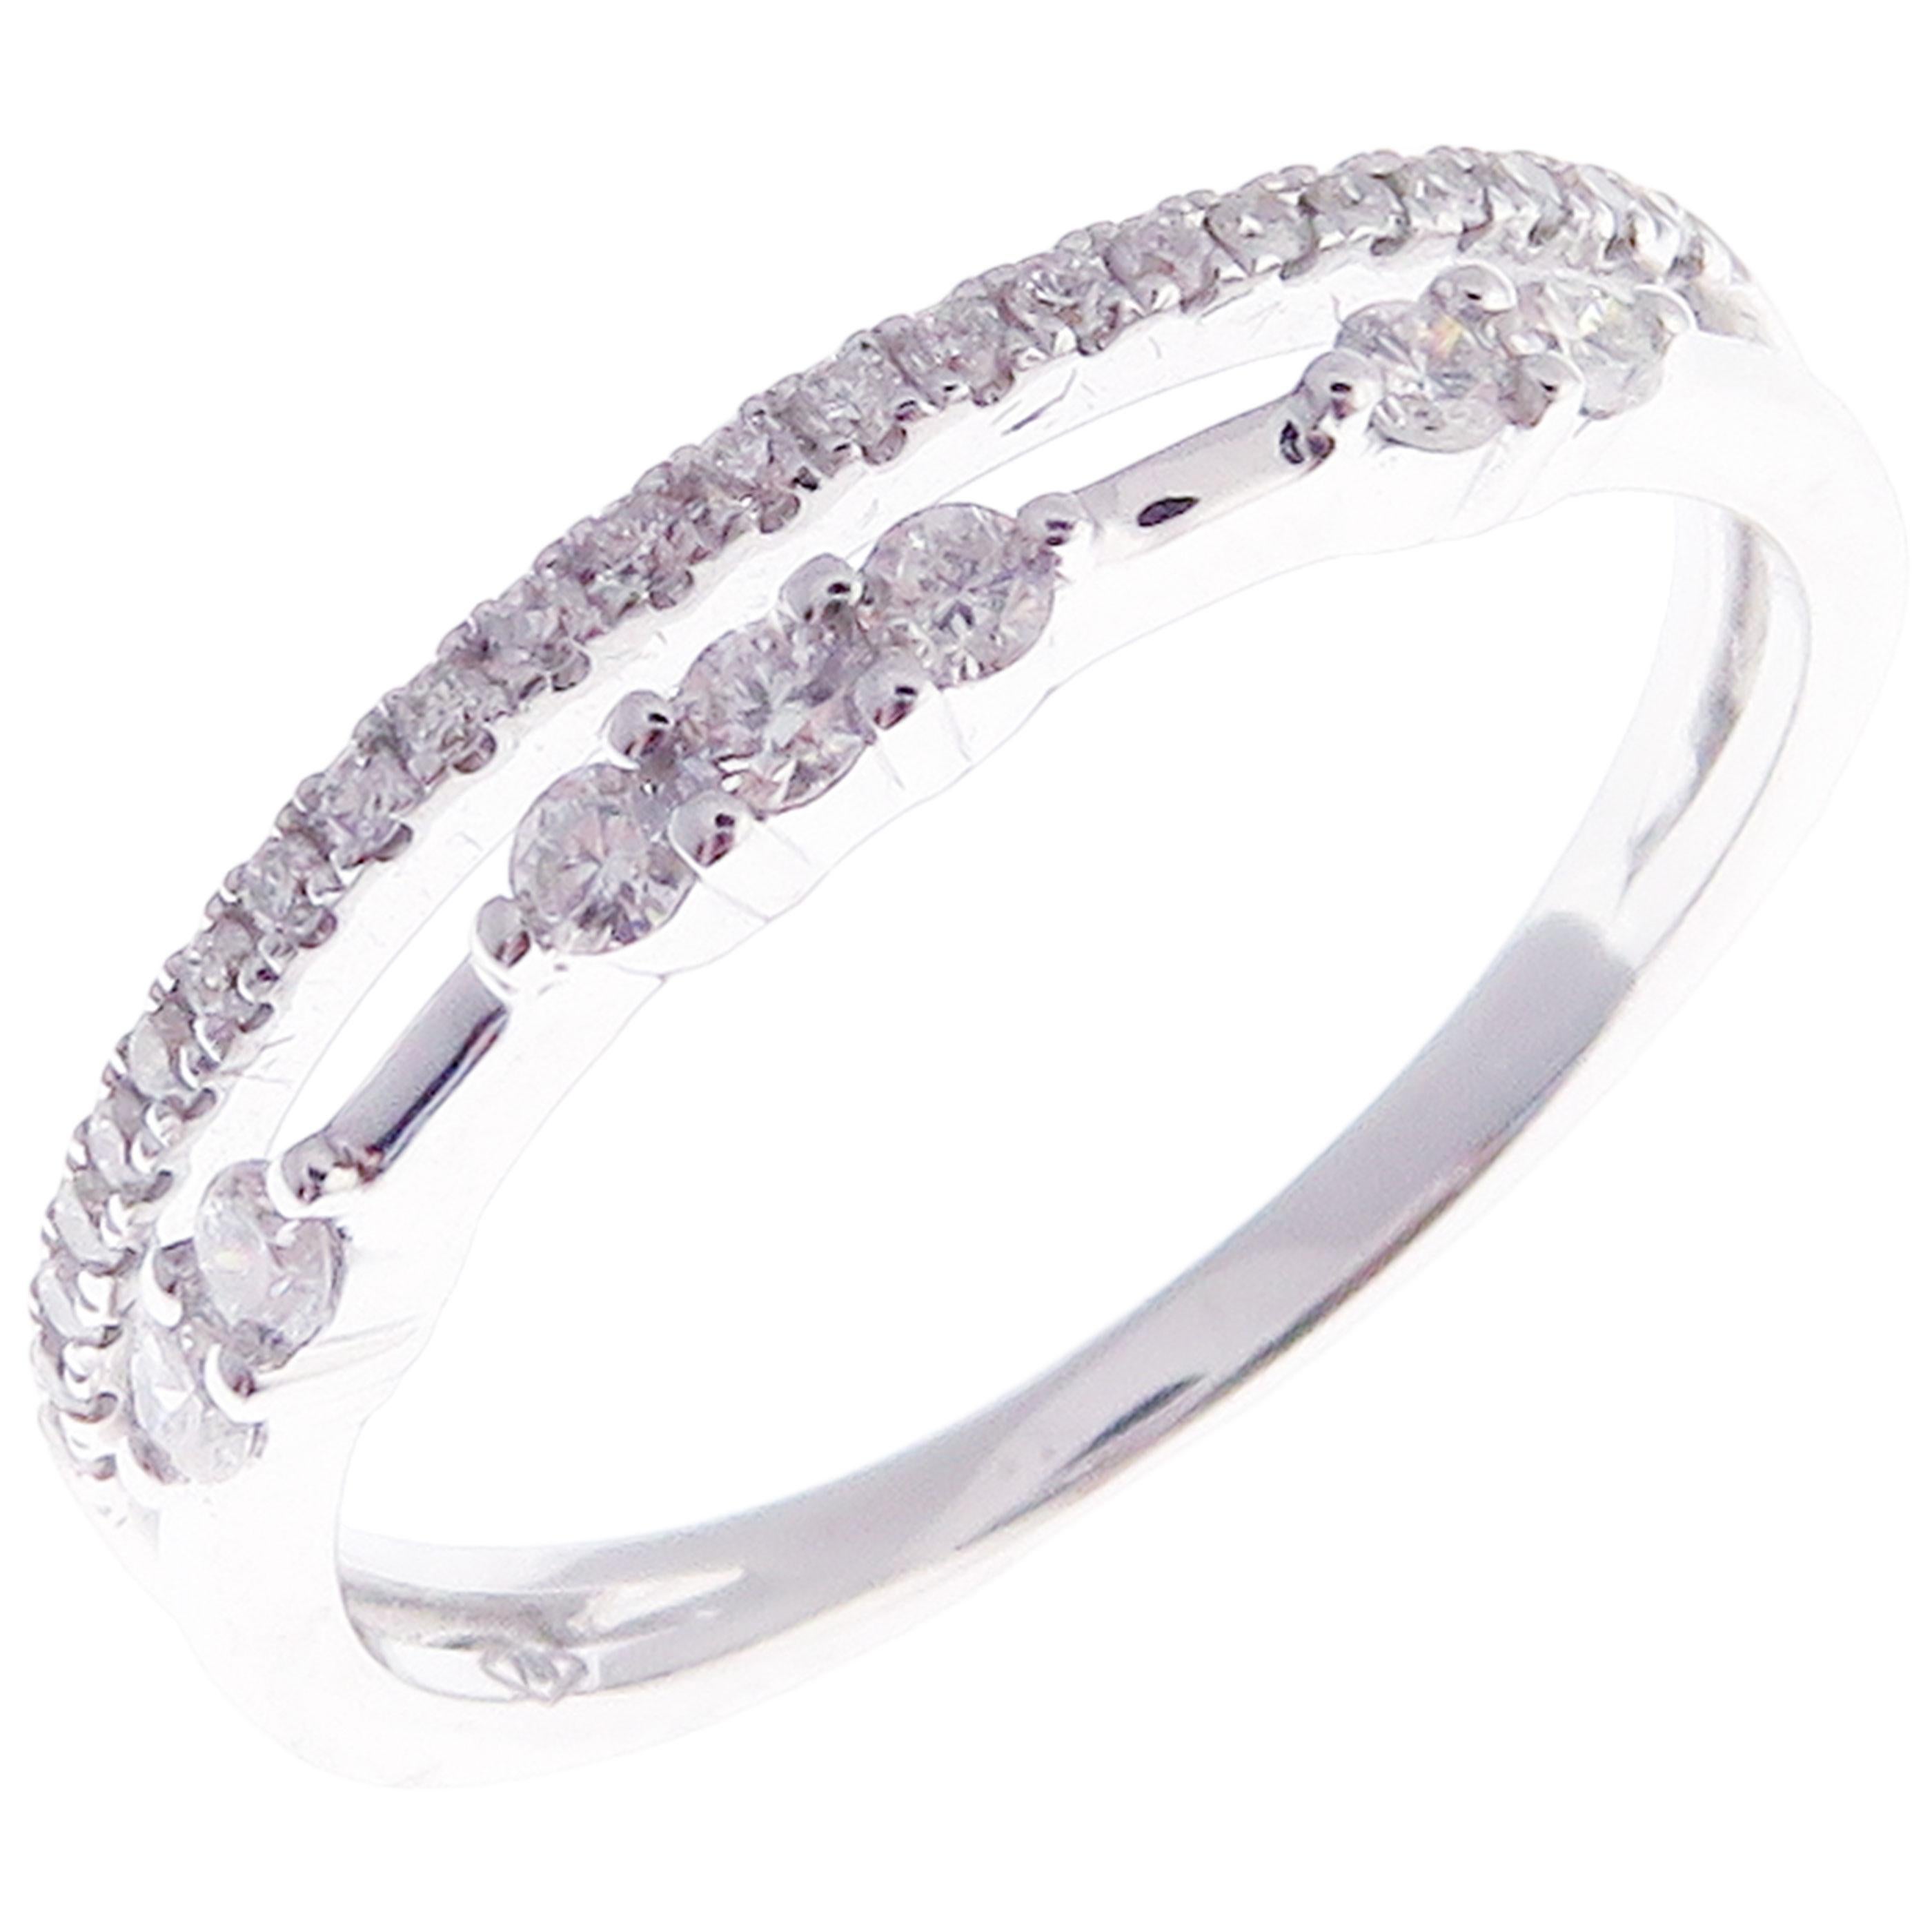 This trendy multi-layer  ring is crafted in 18-karat white gold, featuring 30 round white diamonds totaling of 0.30 carats.
Approximate total weight 2.84 grams.
Standard Ring size 7
SI-G Quality natural white diamonds.